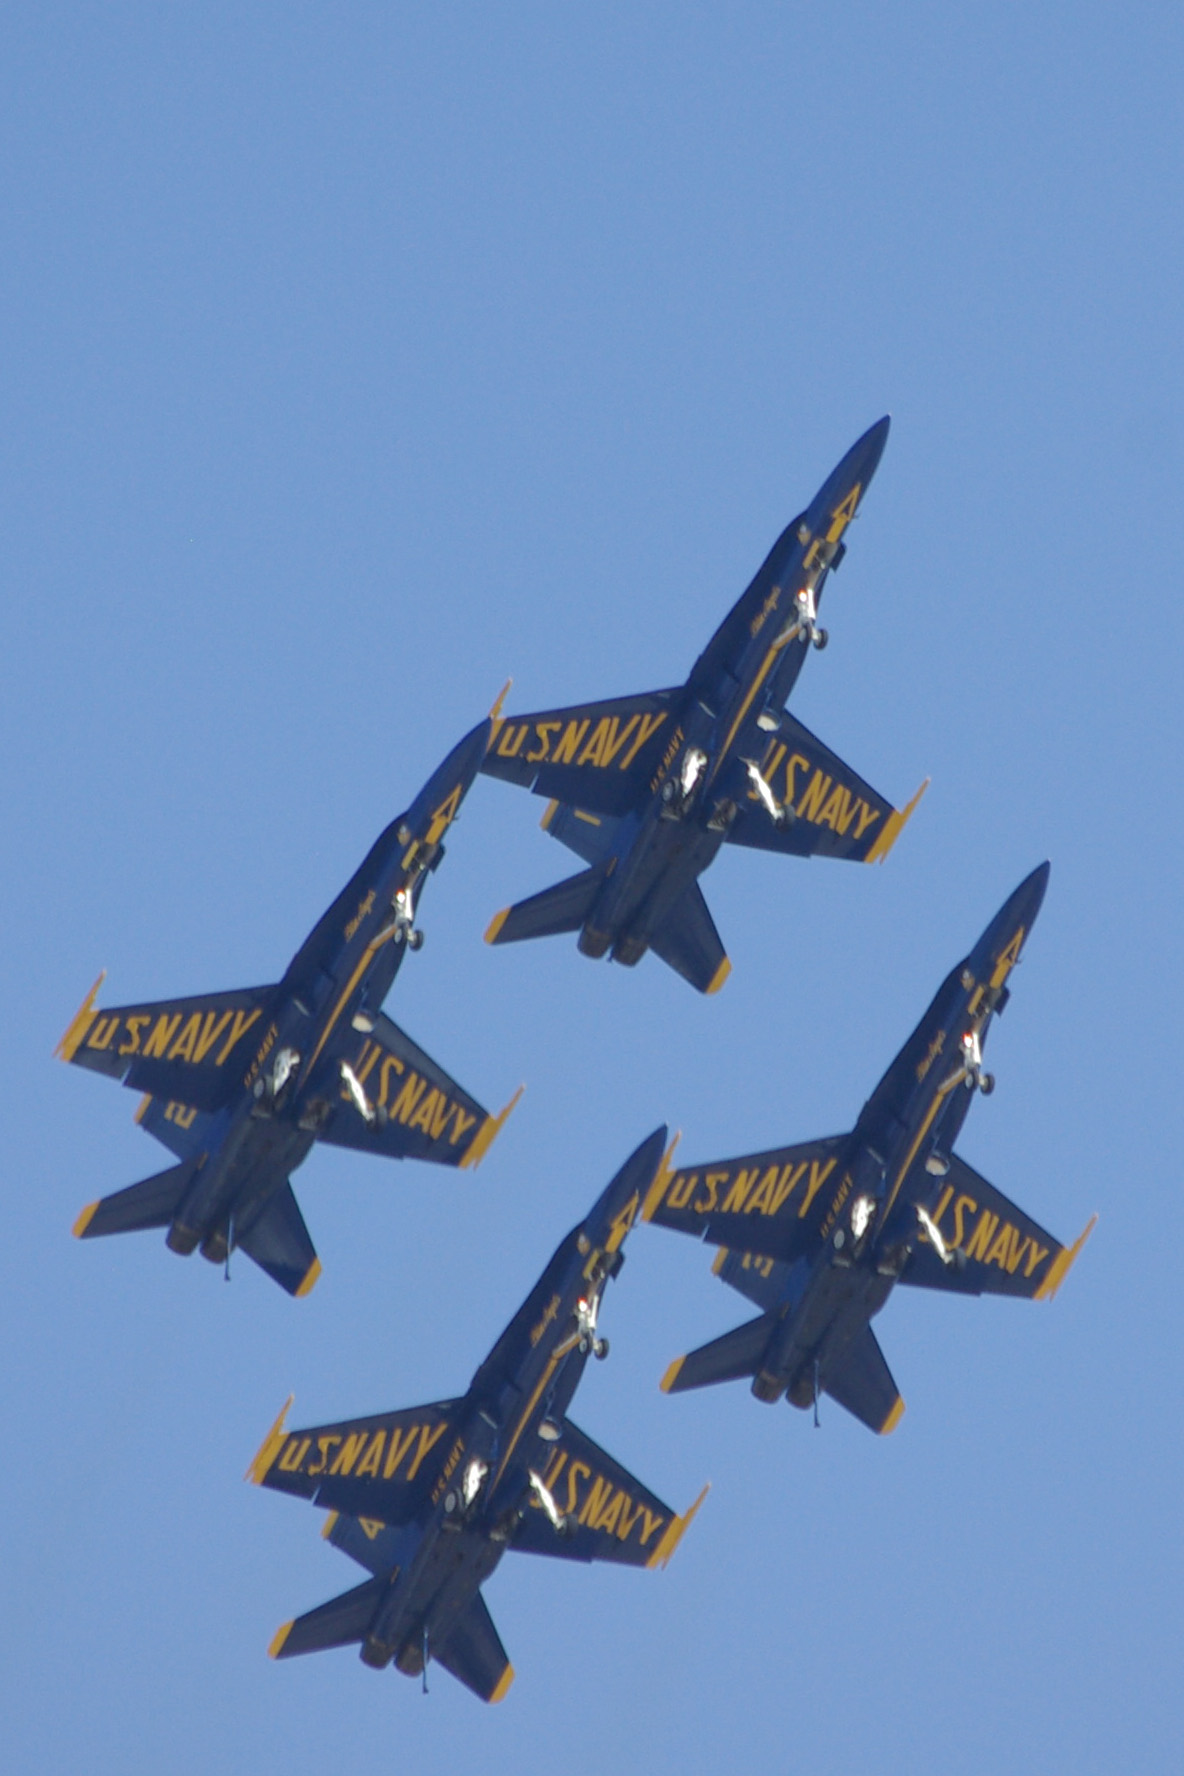 several jets fly together in an upward pattern